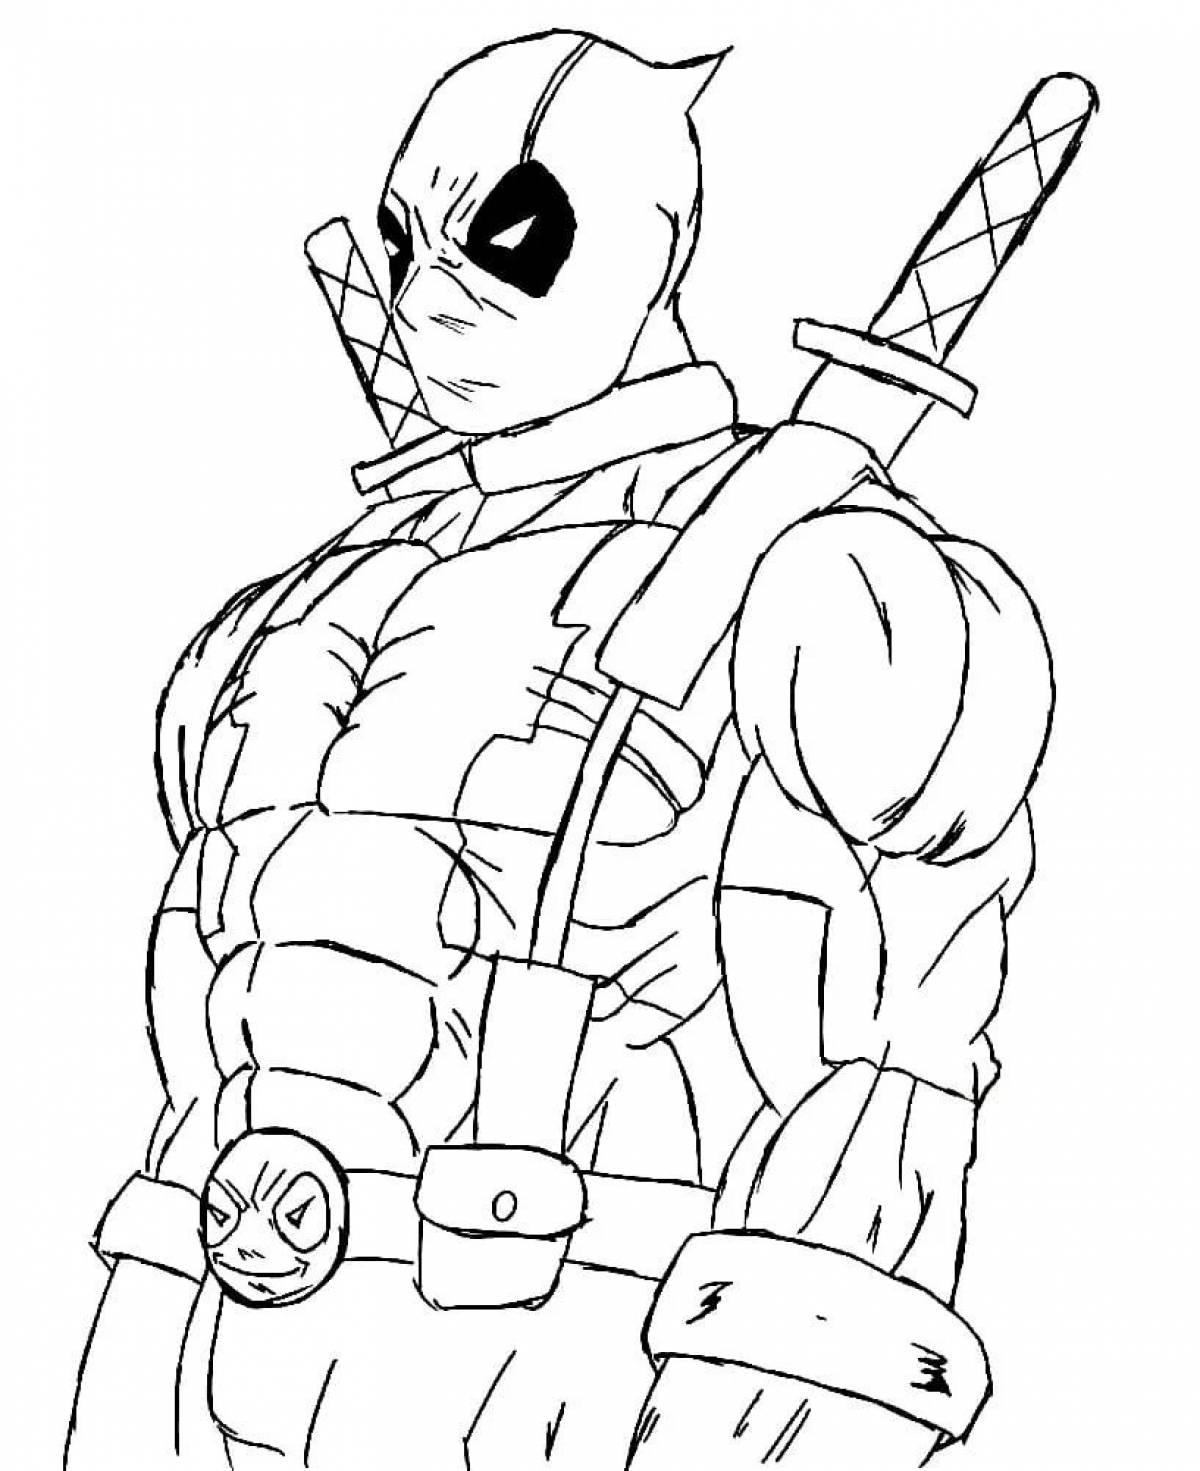 Impressive coloring book of deadpool and spiderman for kids